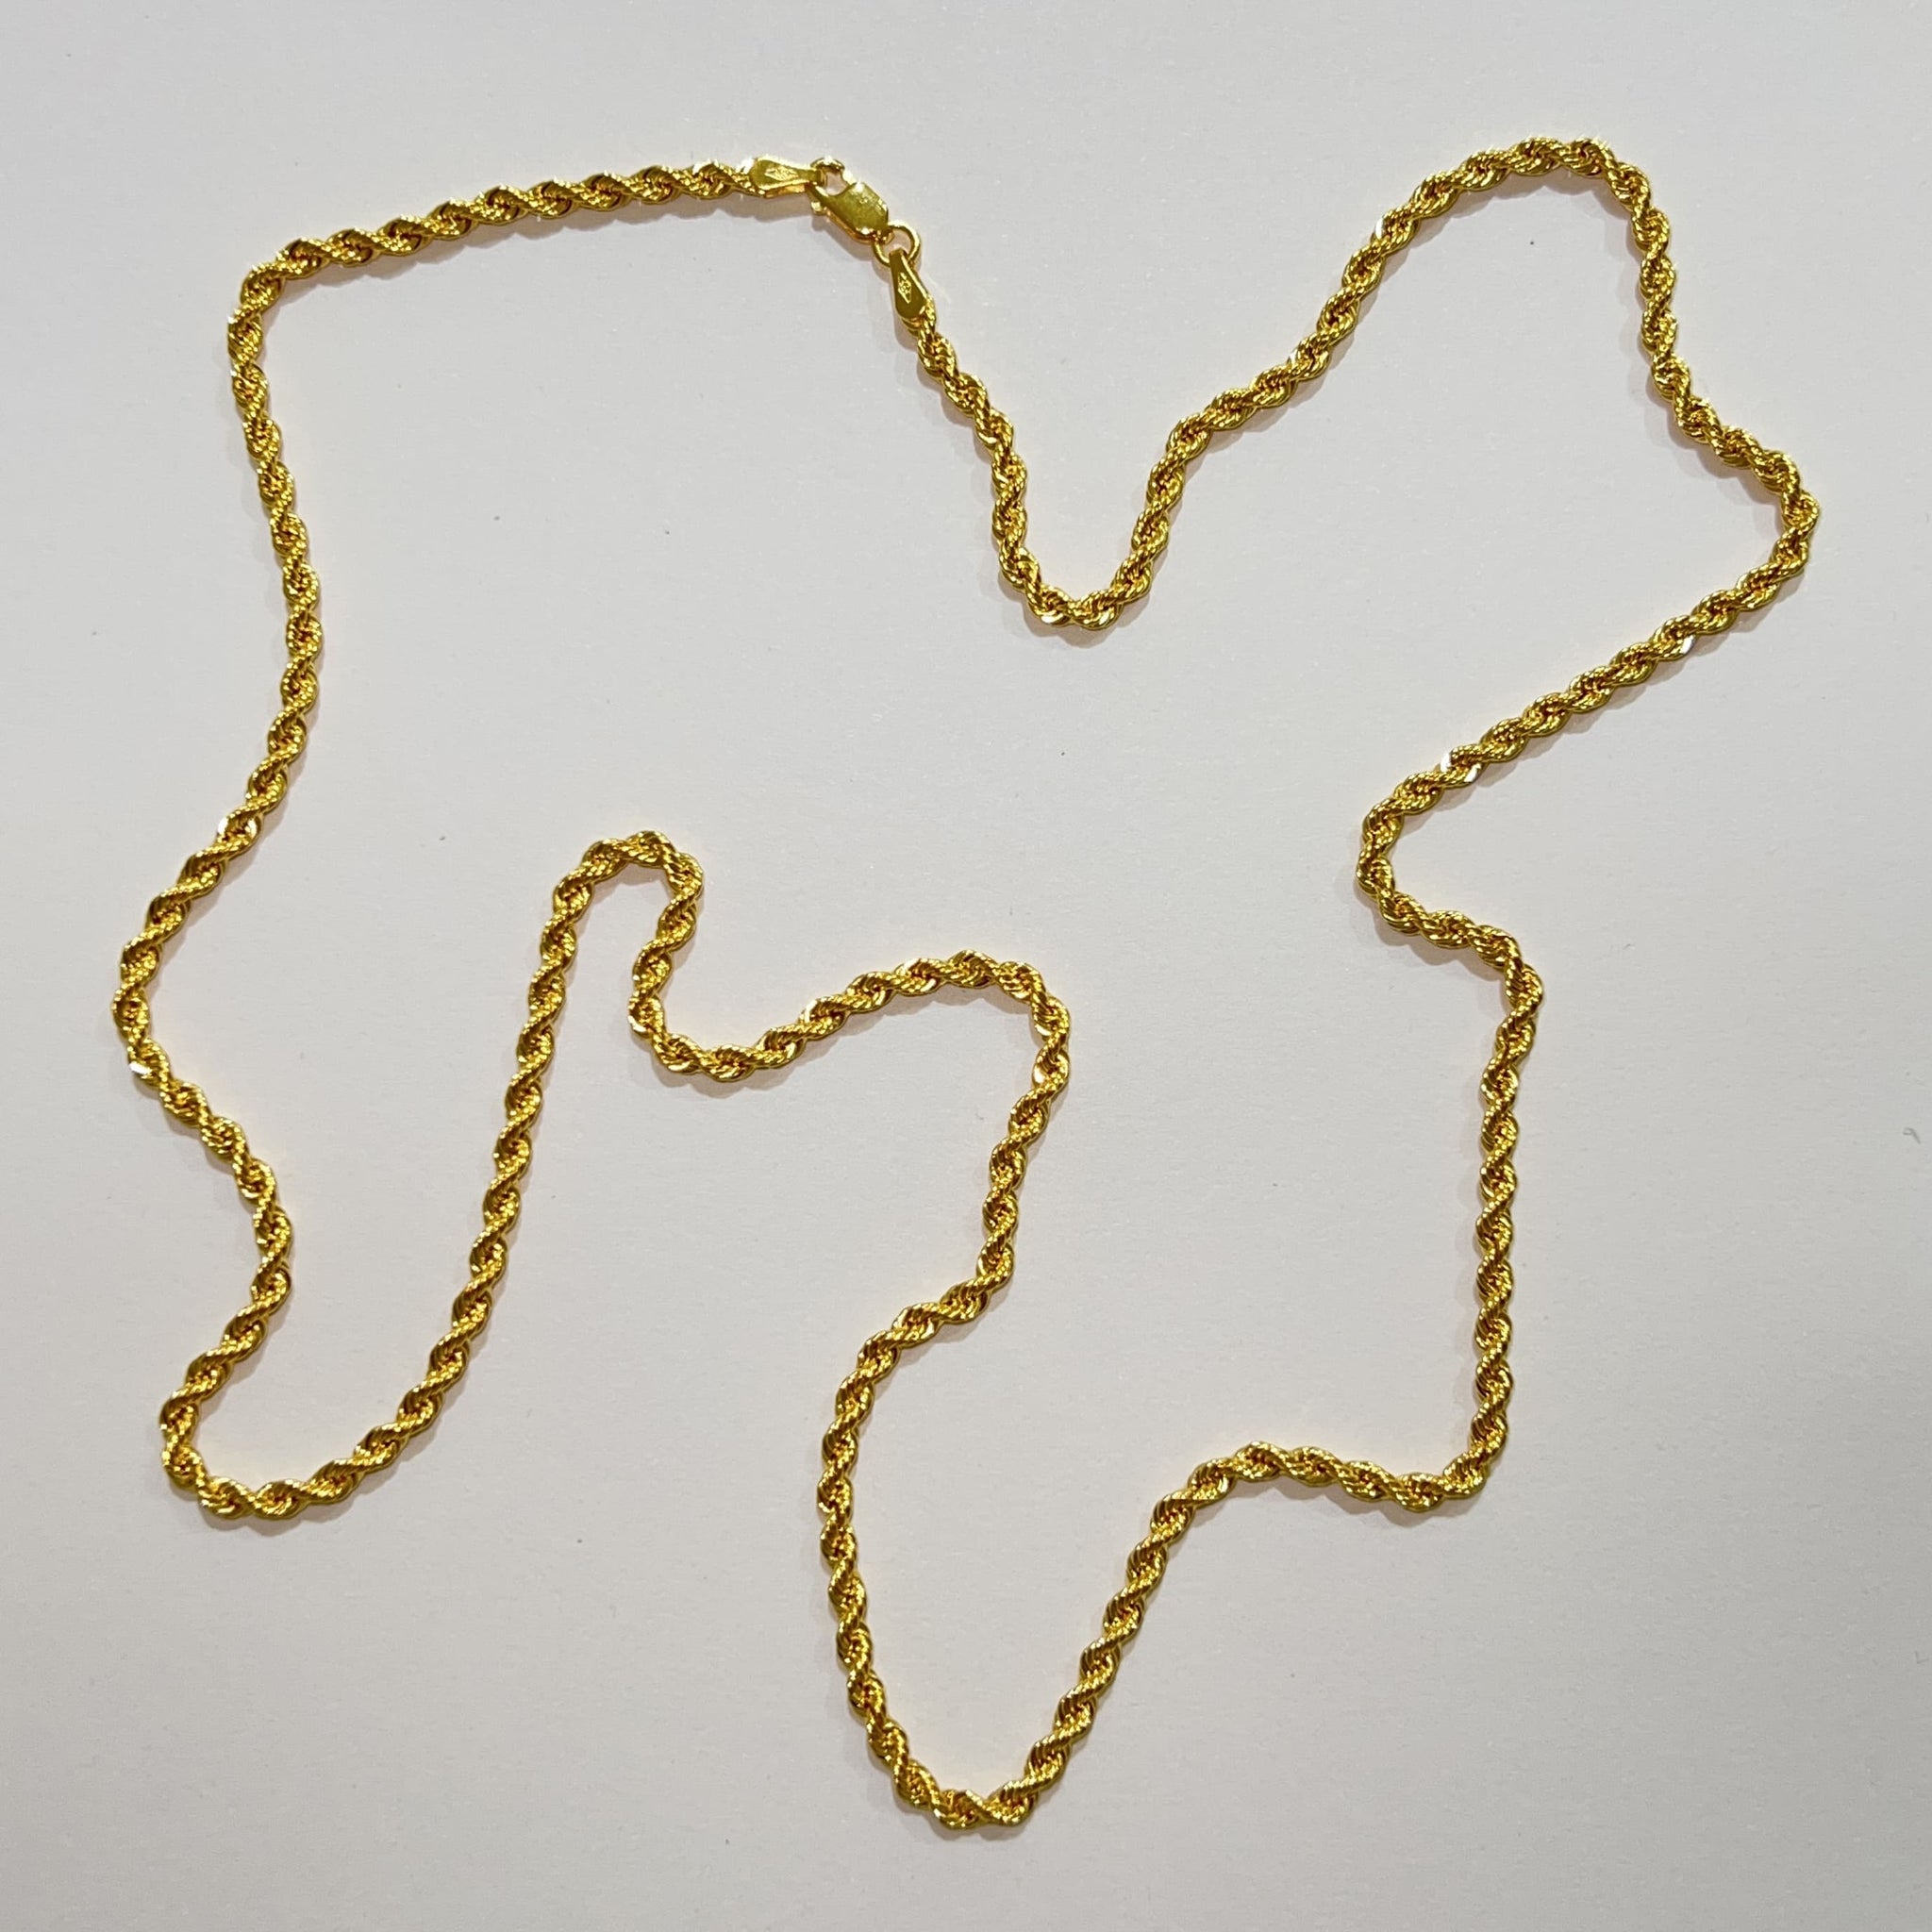 Rope Chain - 14 carat gold - 2.7mm / 60cm